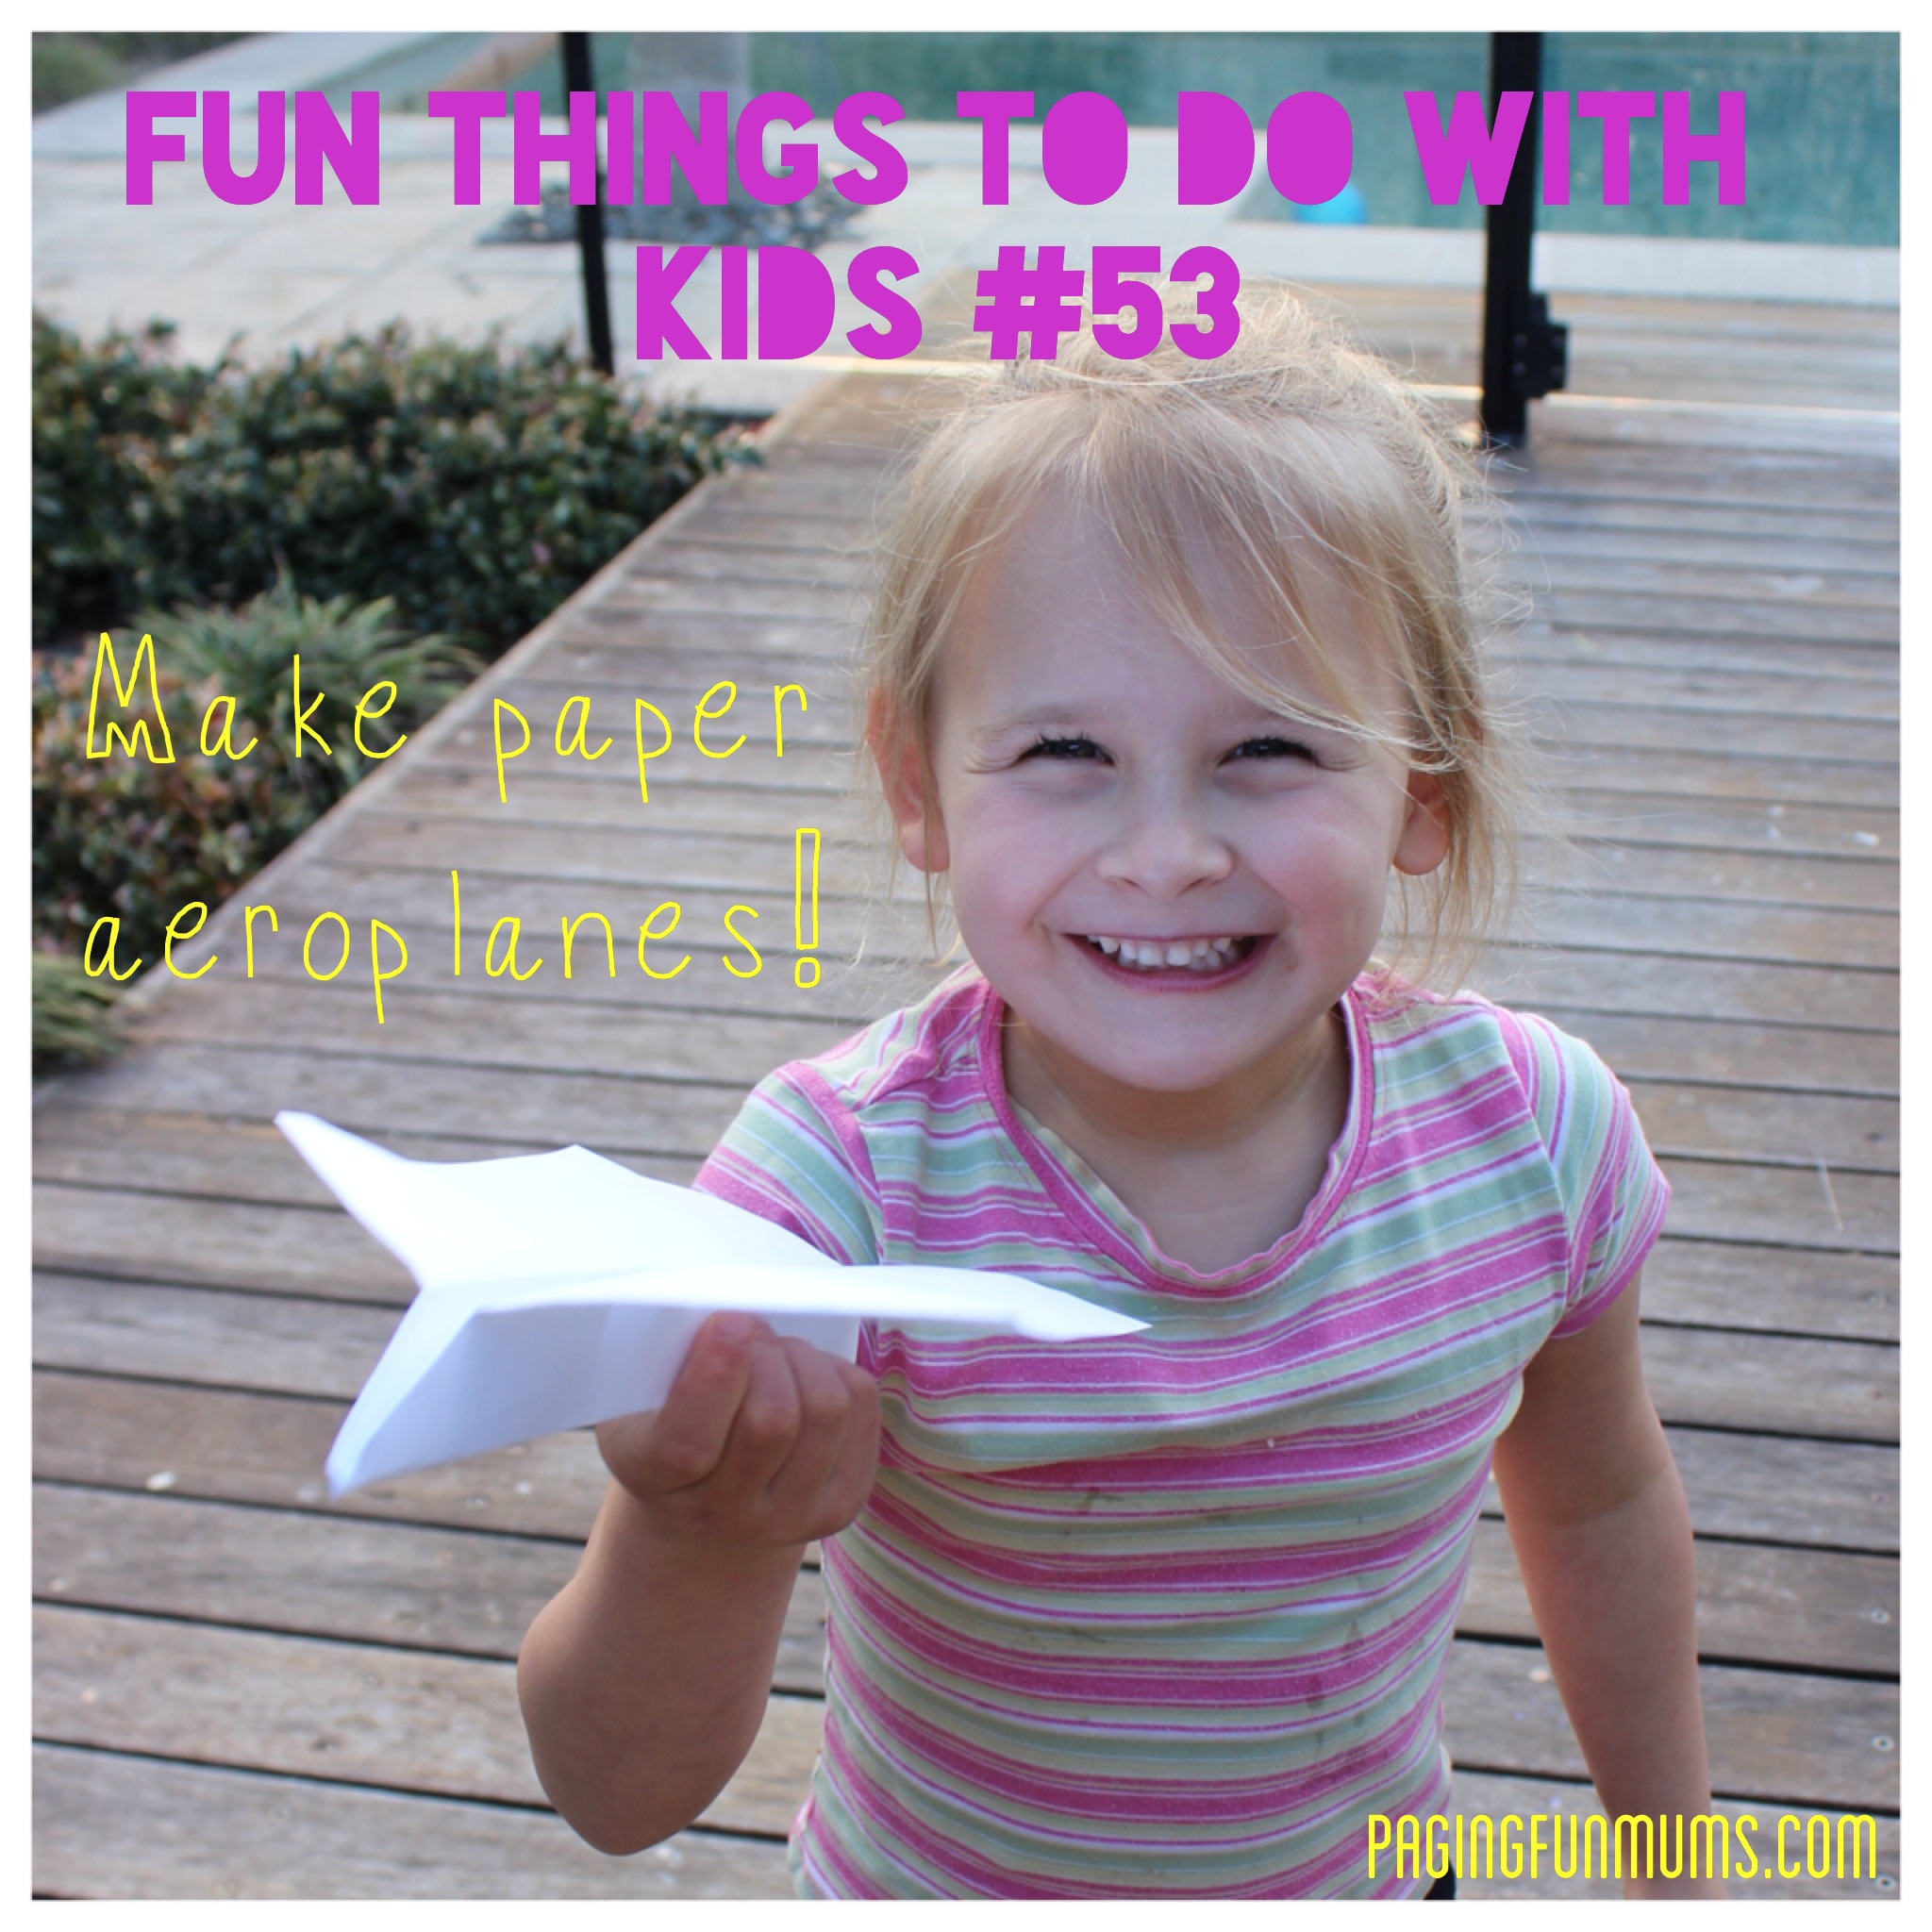 101 Fun things to do with kids.